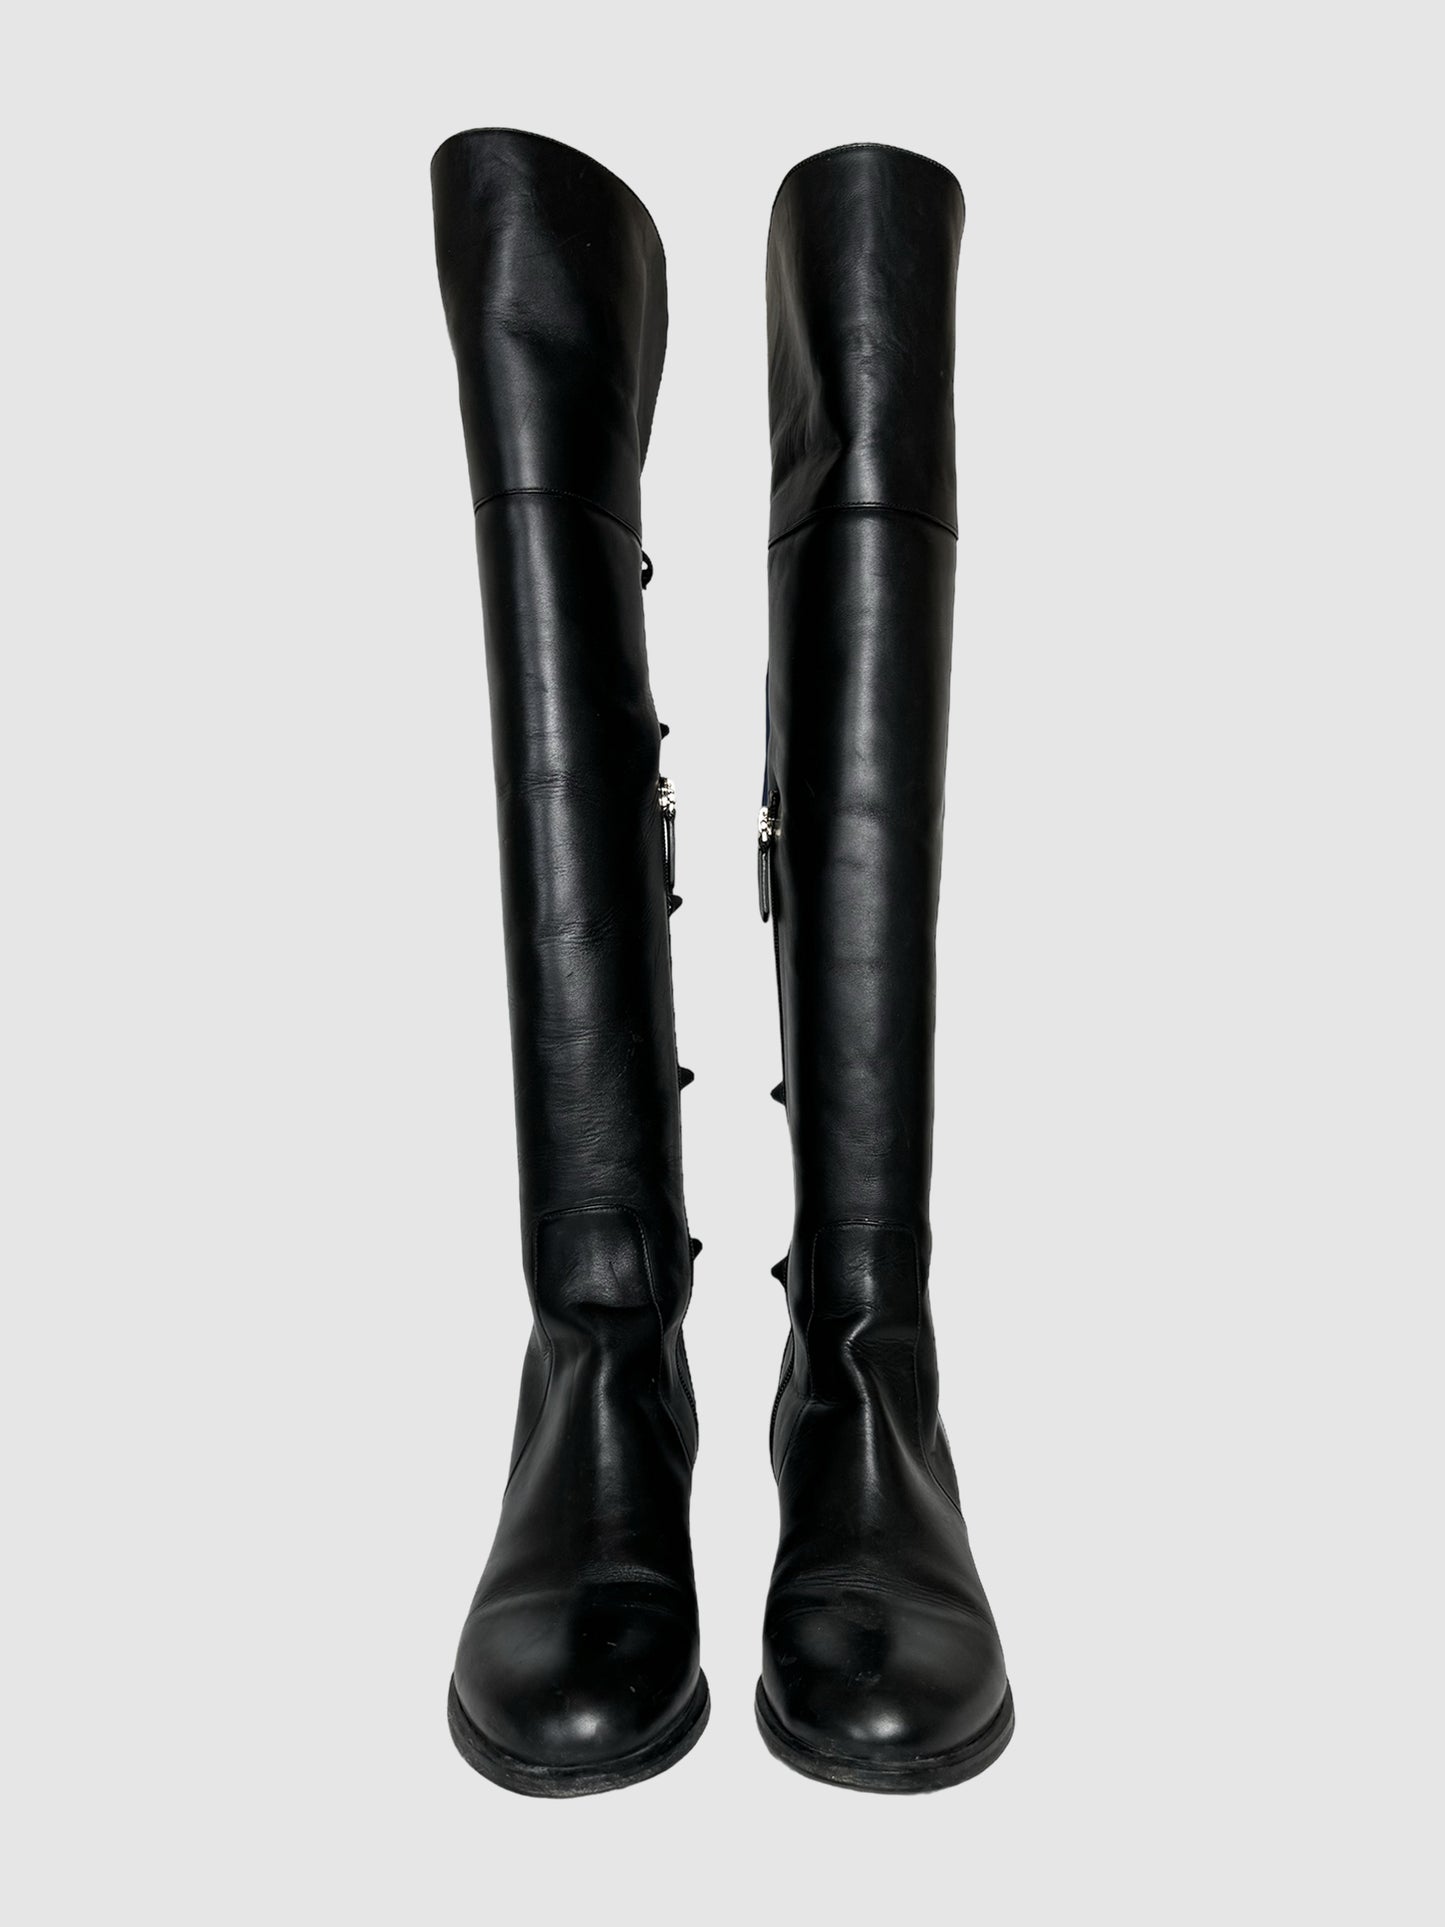 Garavani Over-the-Knee Back Bow Boots - Size 7.5